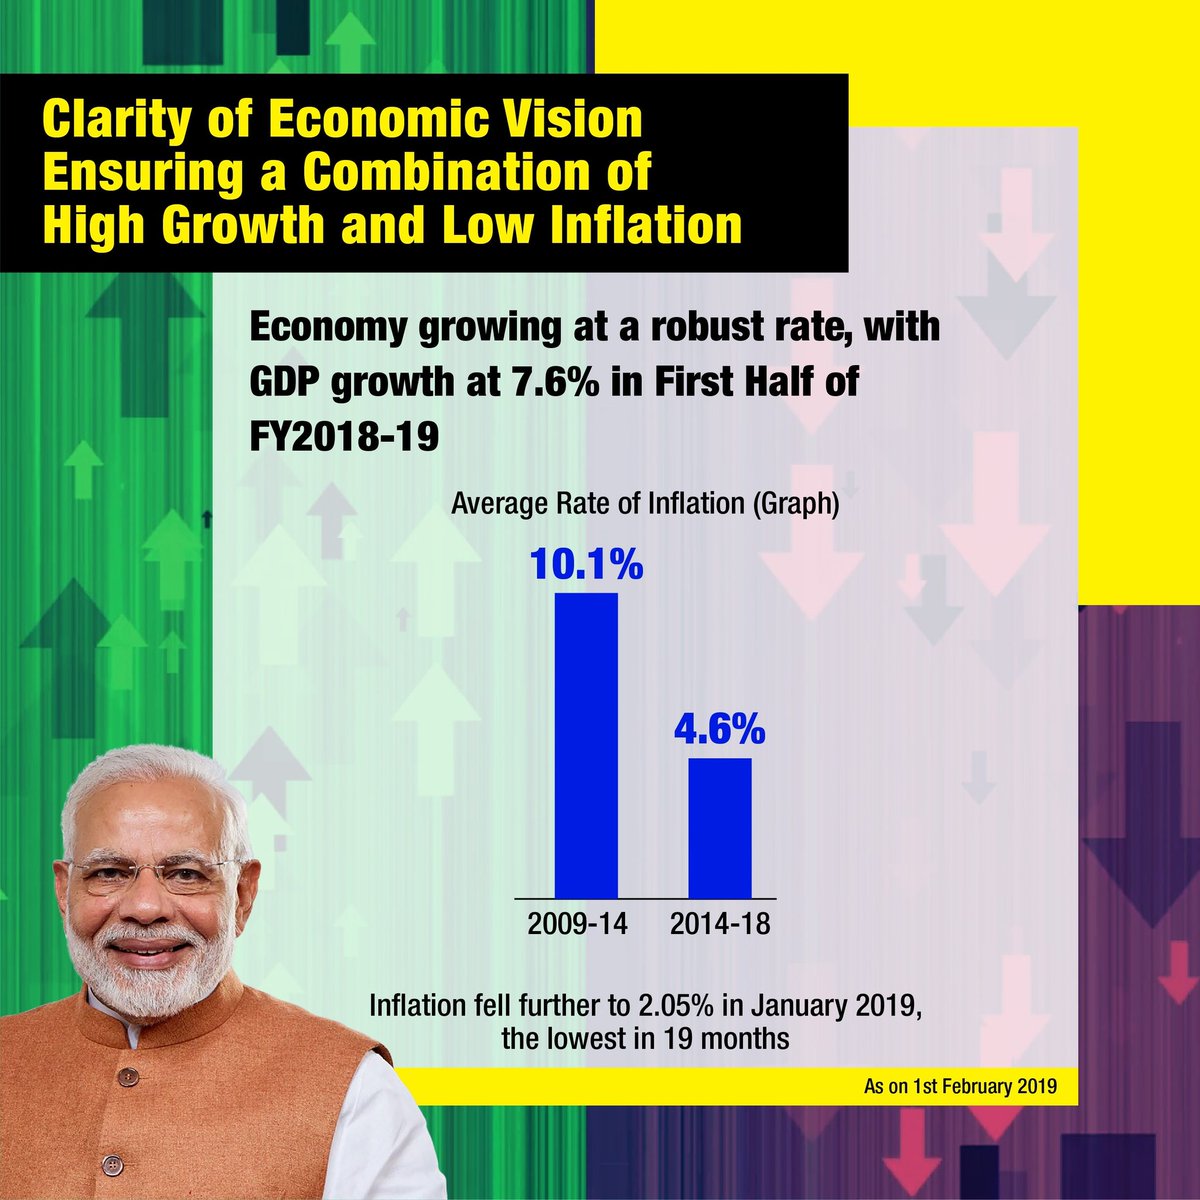 *I* - Inflation control, Internet Charges, IIT 5 New,IIM 6 New,AIIMS 13 NewIndradhanush Mission, IT Return Speed,Insolvency and Bankruptcy Code, Income Tax Rebate till 60 lakh revenue #Moditransformsbharat